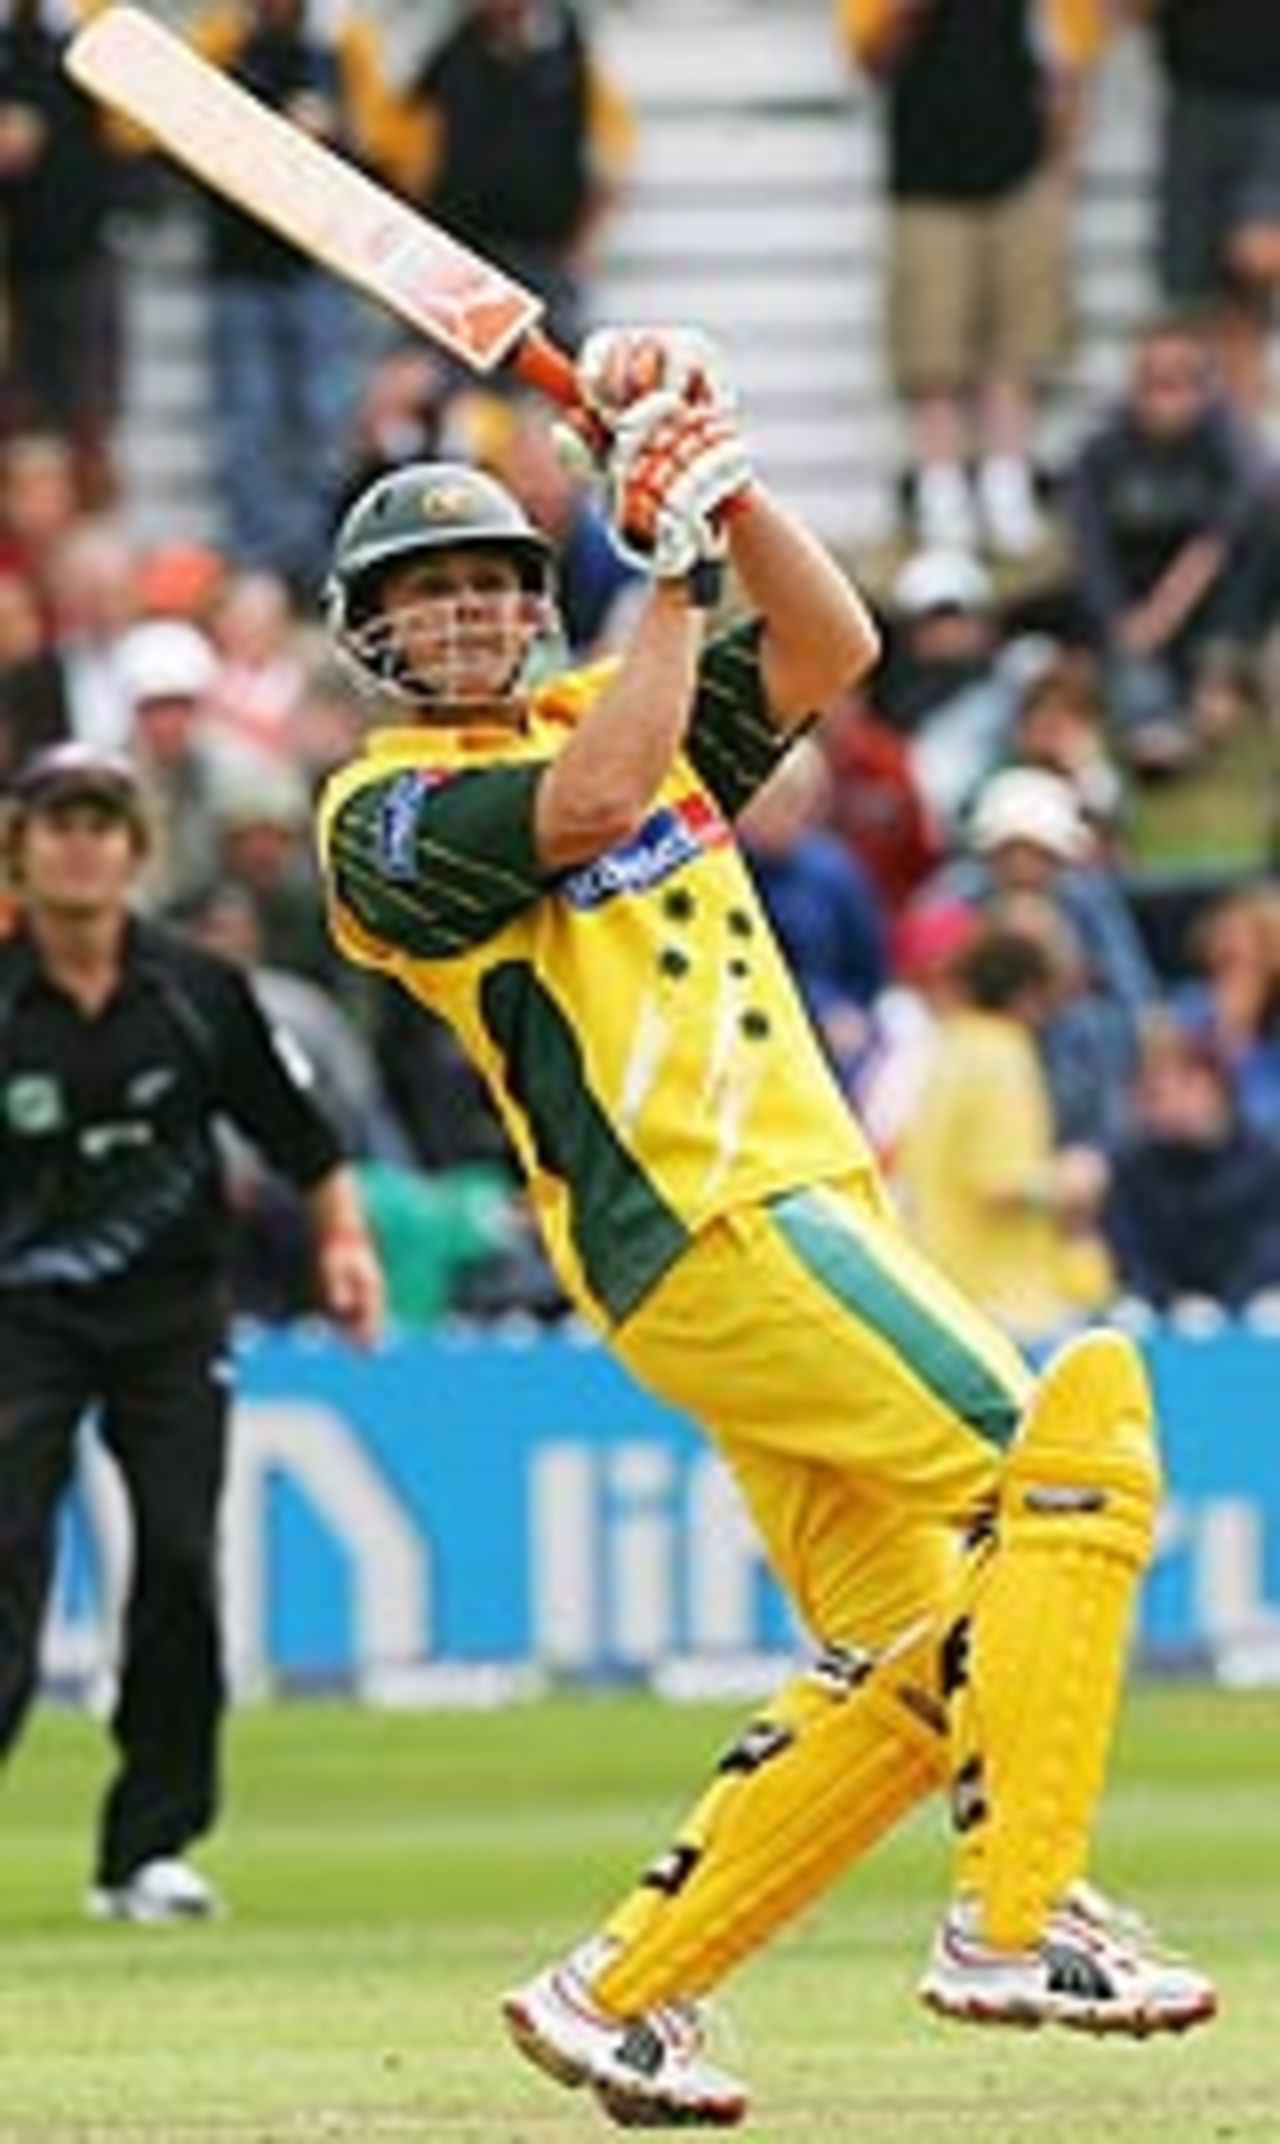 Adam Gilchrist swivels after smacking the ball, New Zealand v Australia, 4th ODI, Wellington, March 1, 2005